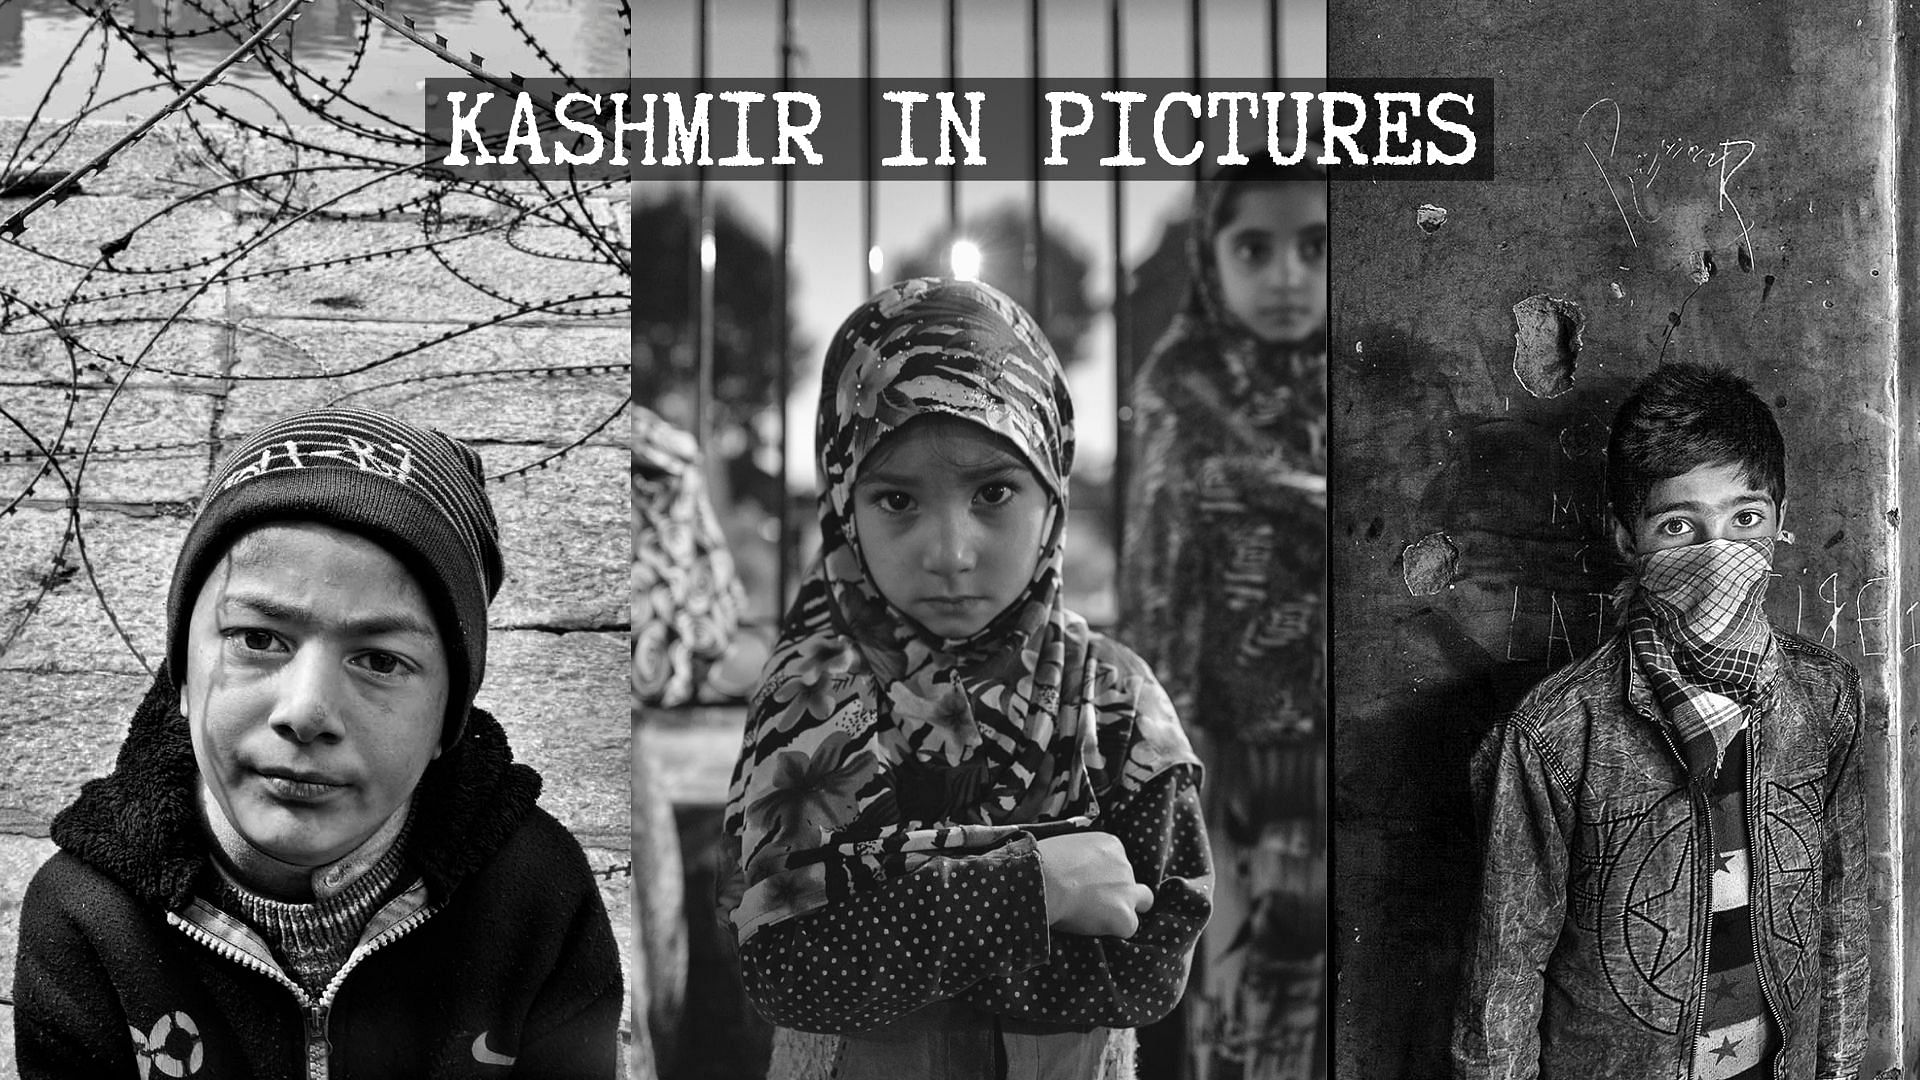 Avani Rai is a photographer and filmmaker whose work has mainly focused on women and children in Kashmir.